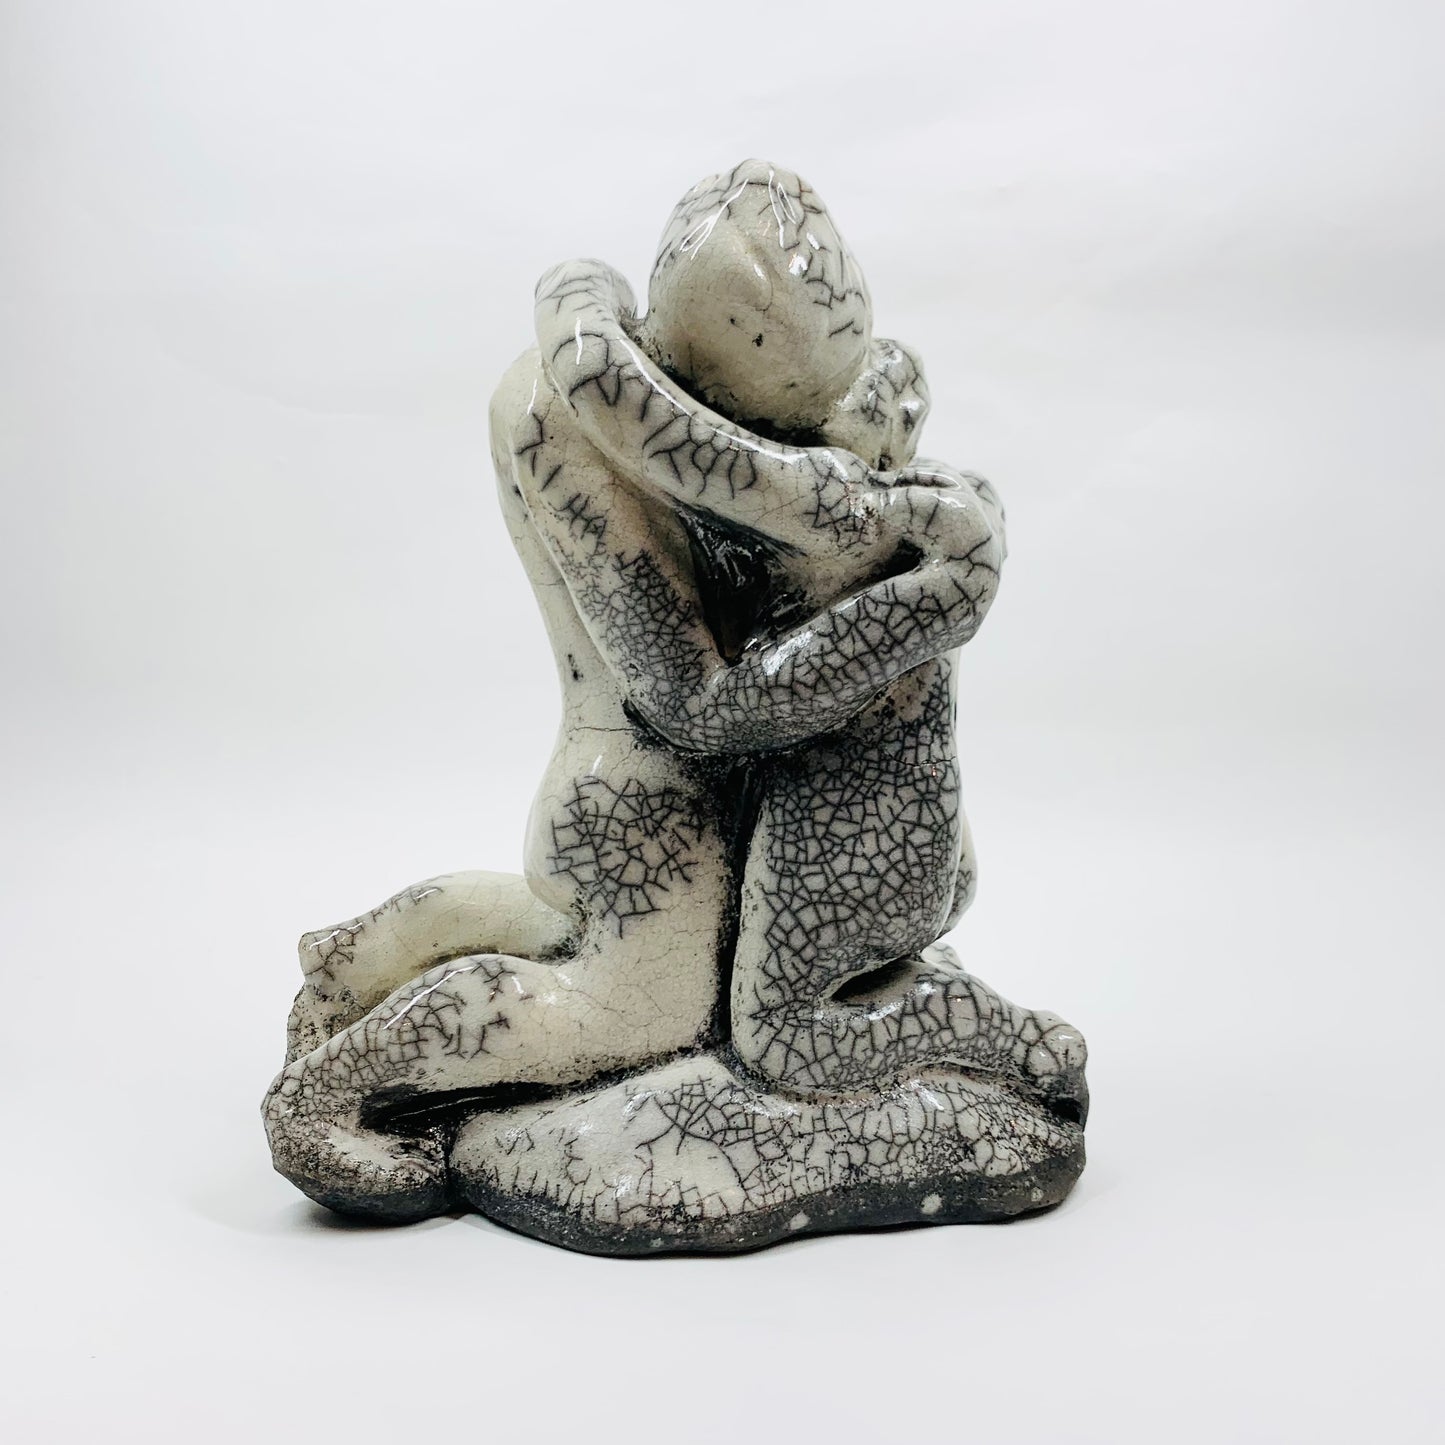 ABSTRACT CRACKLE POTTERY SCULPTURE